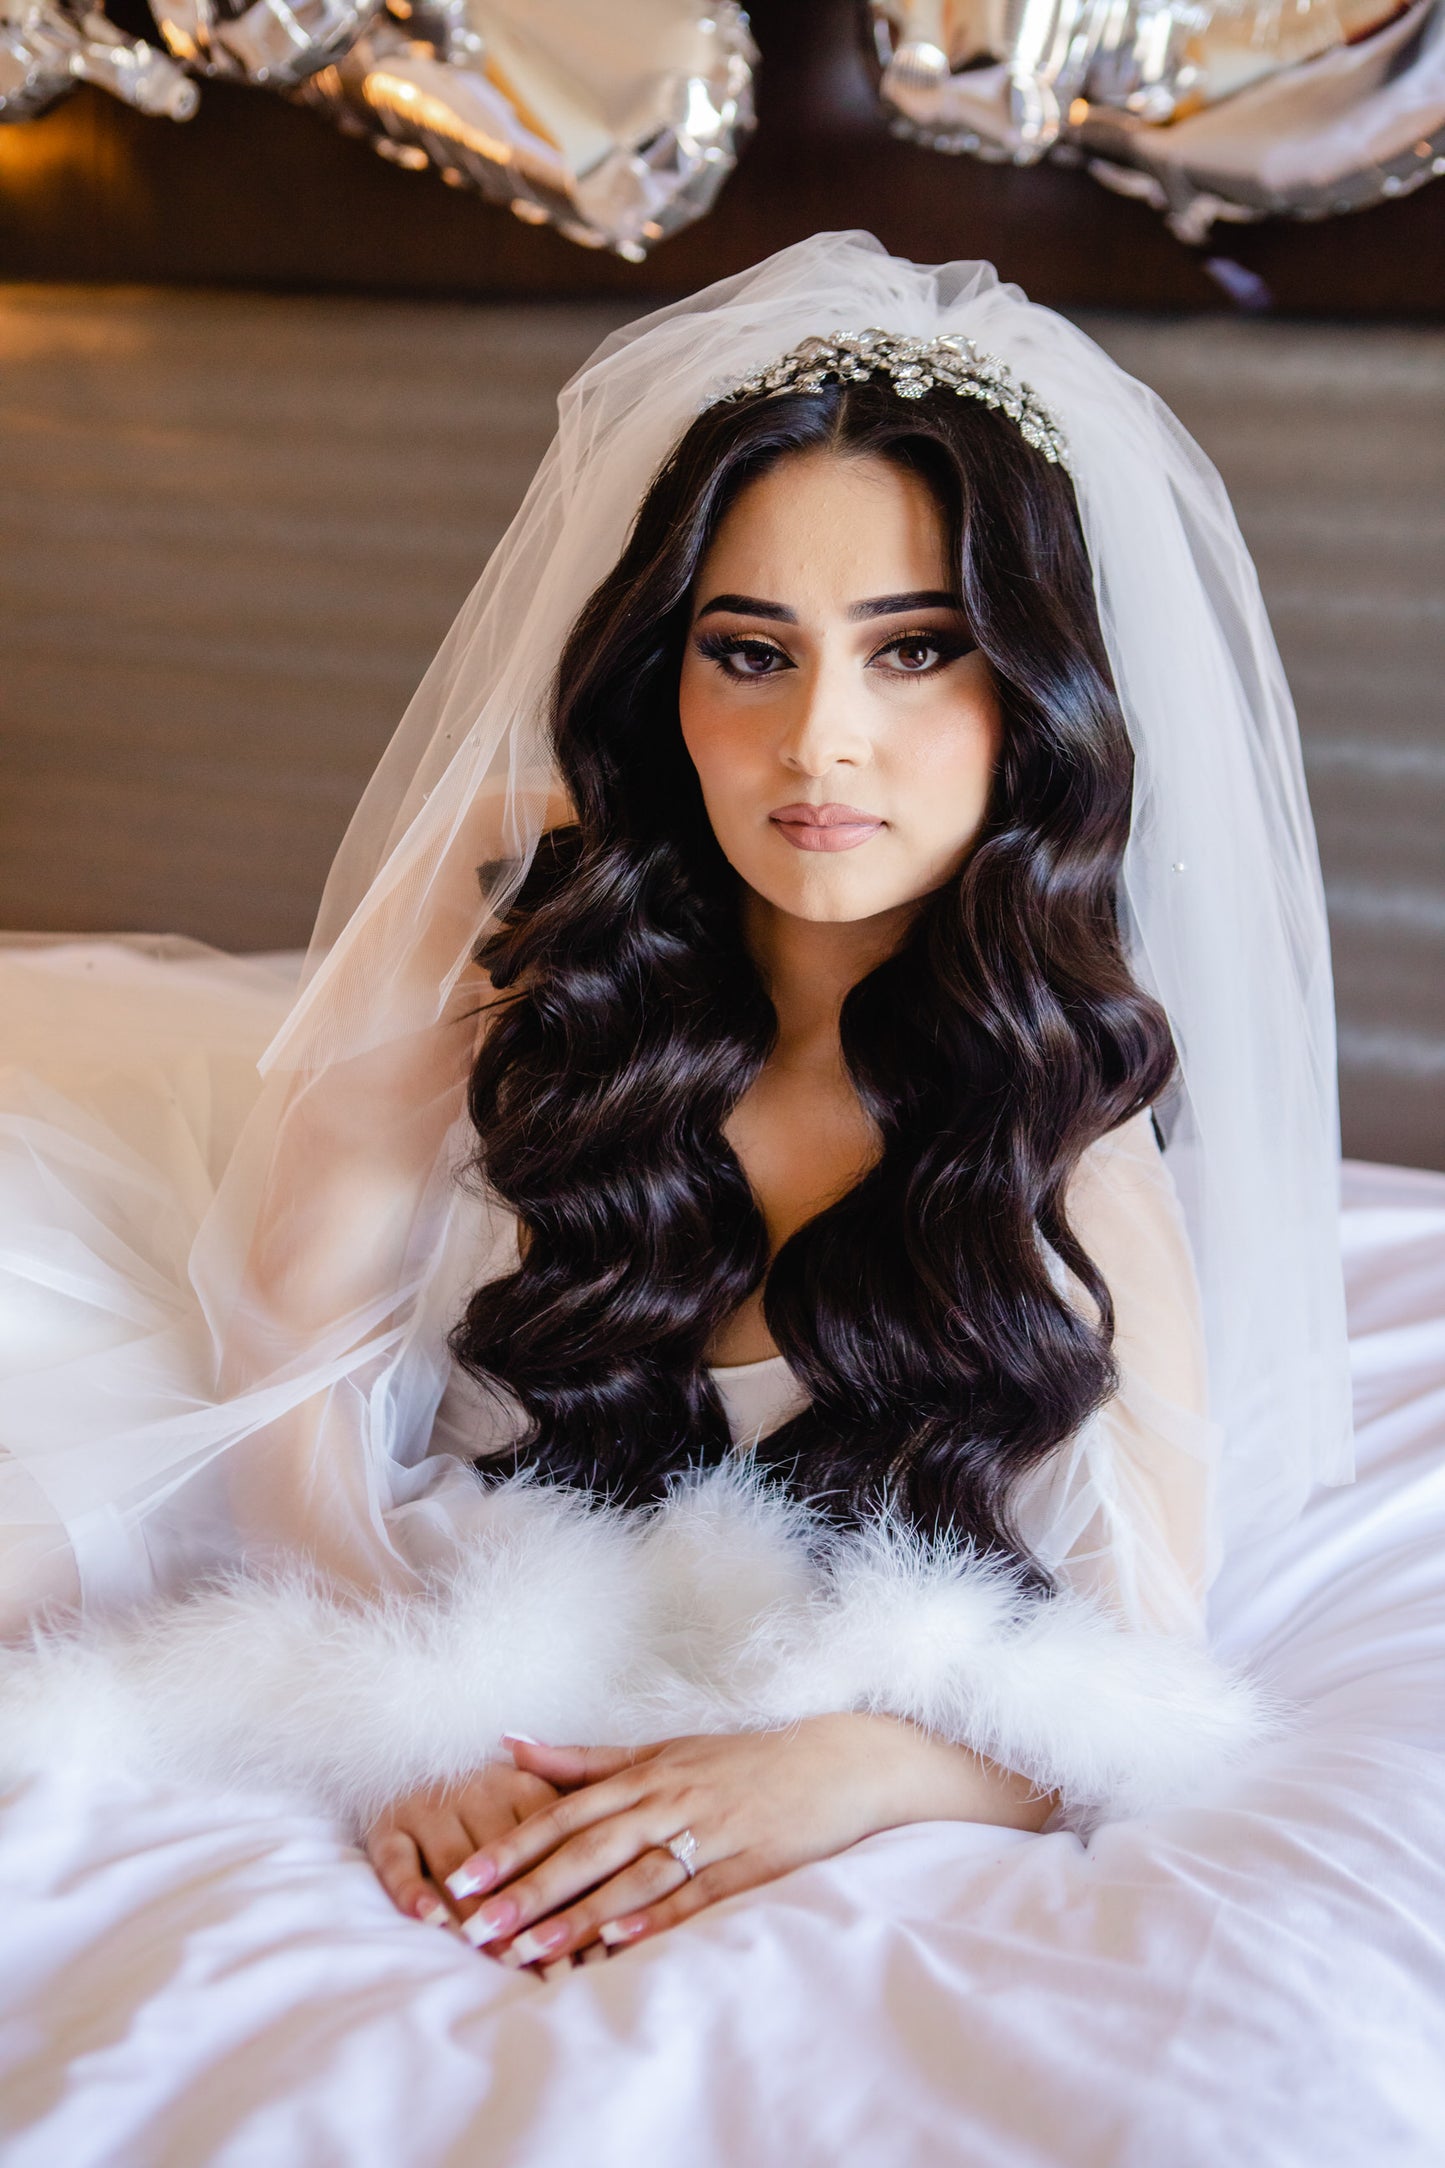 Middle eastern bride with defined curls and extra puffy two layer wedding veil with crystals headpiece 